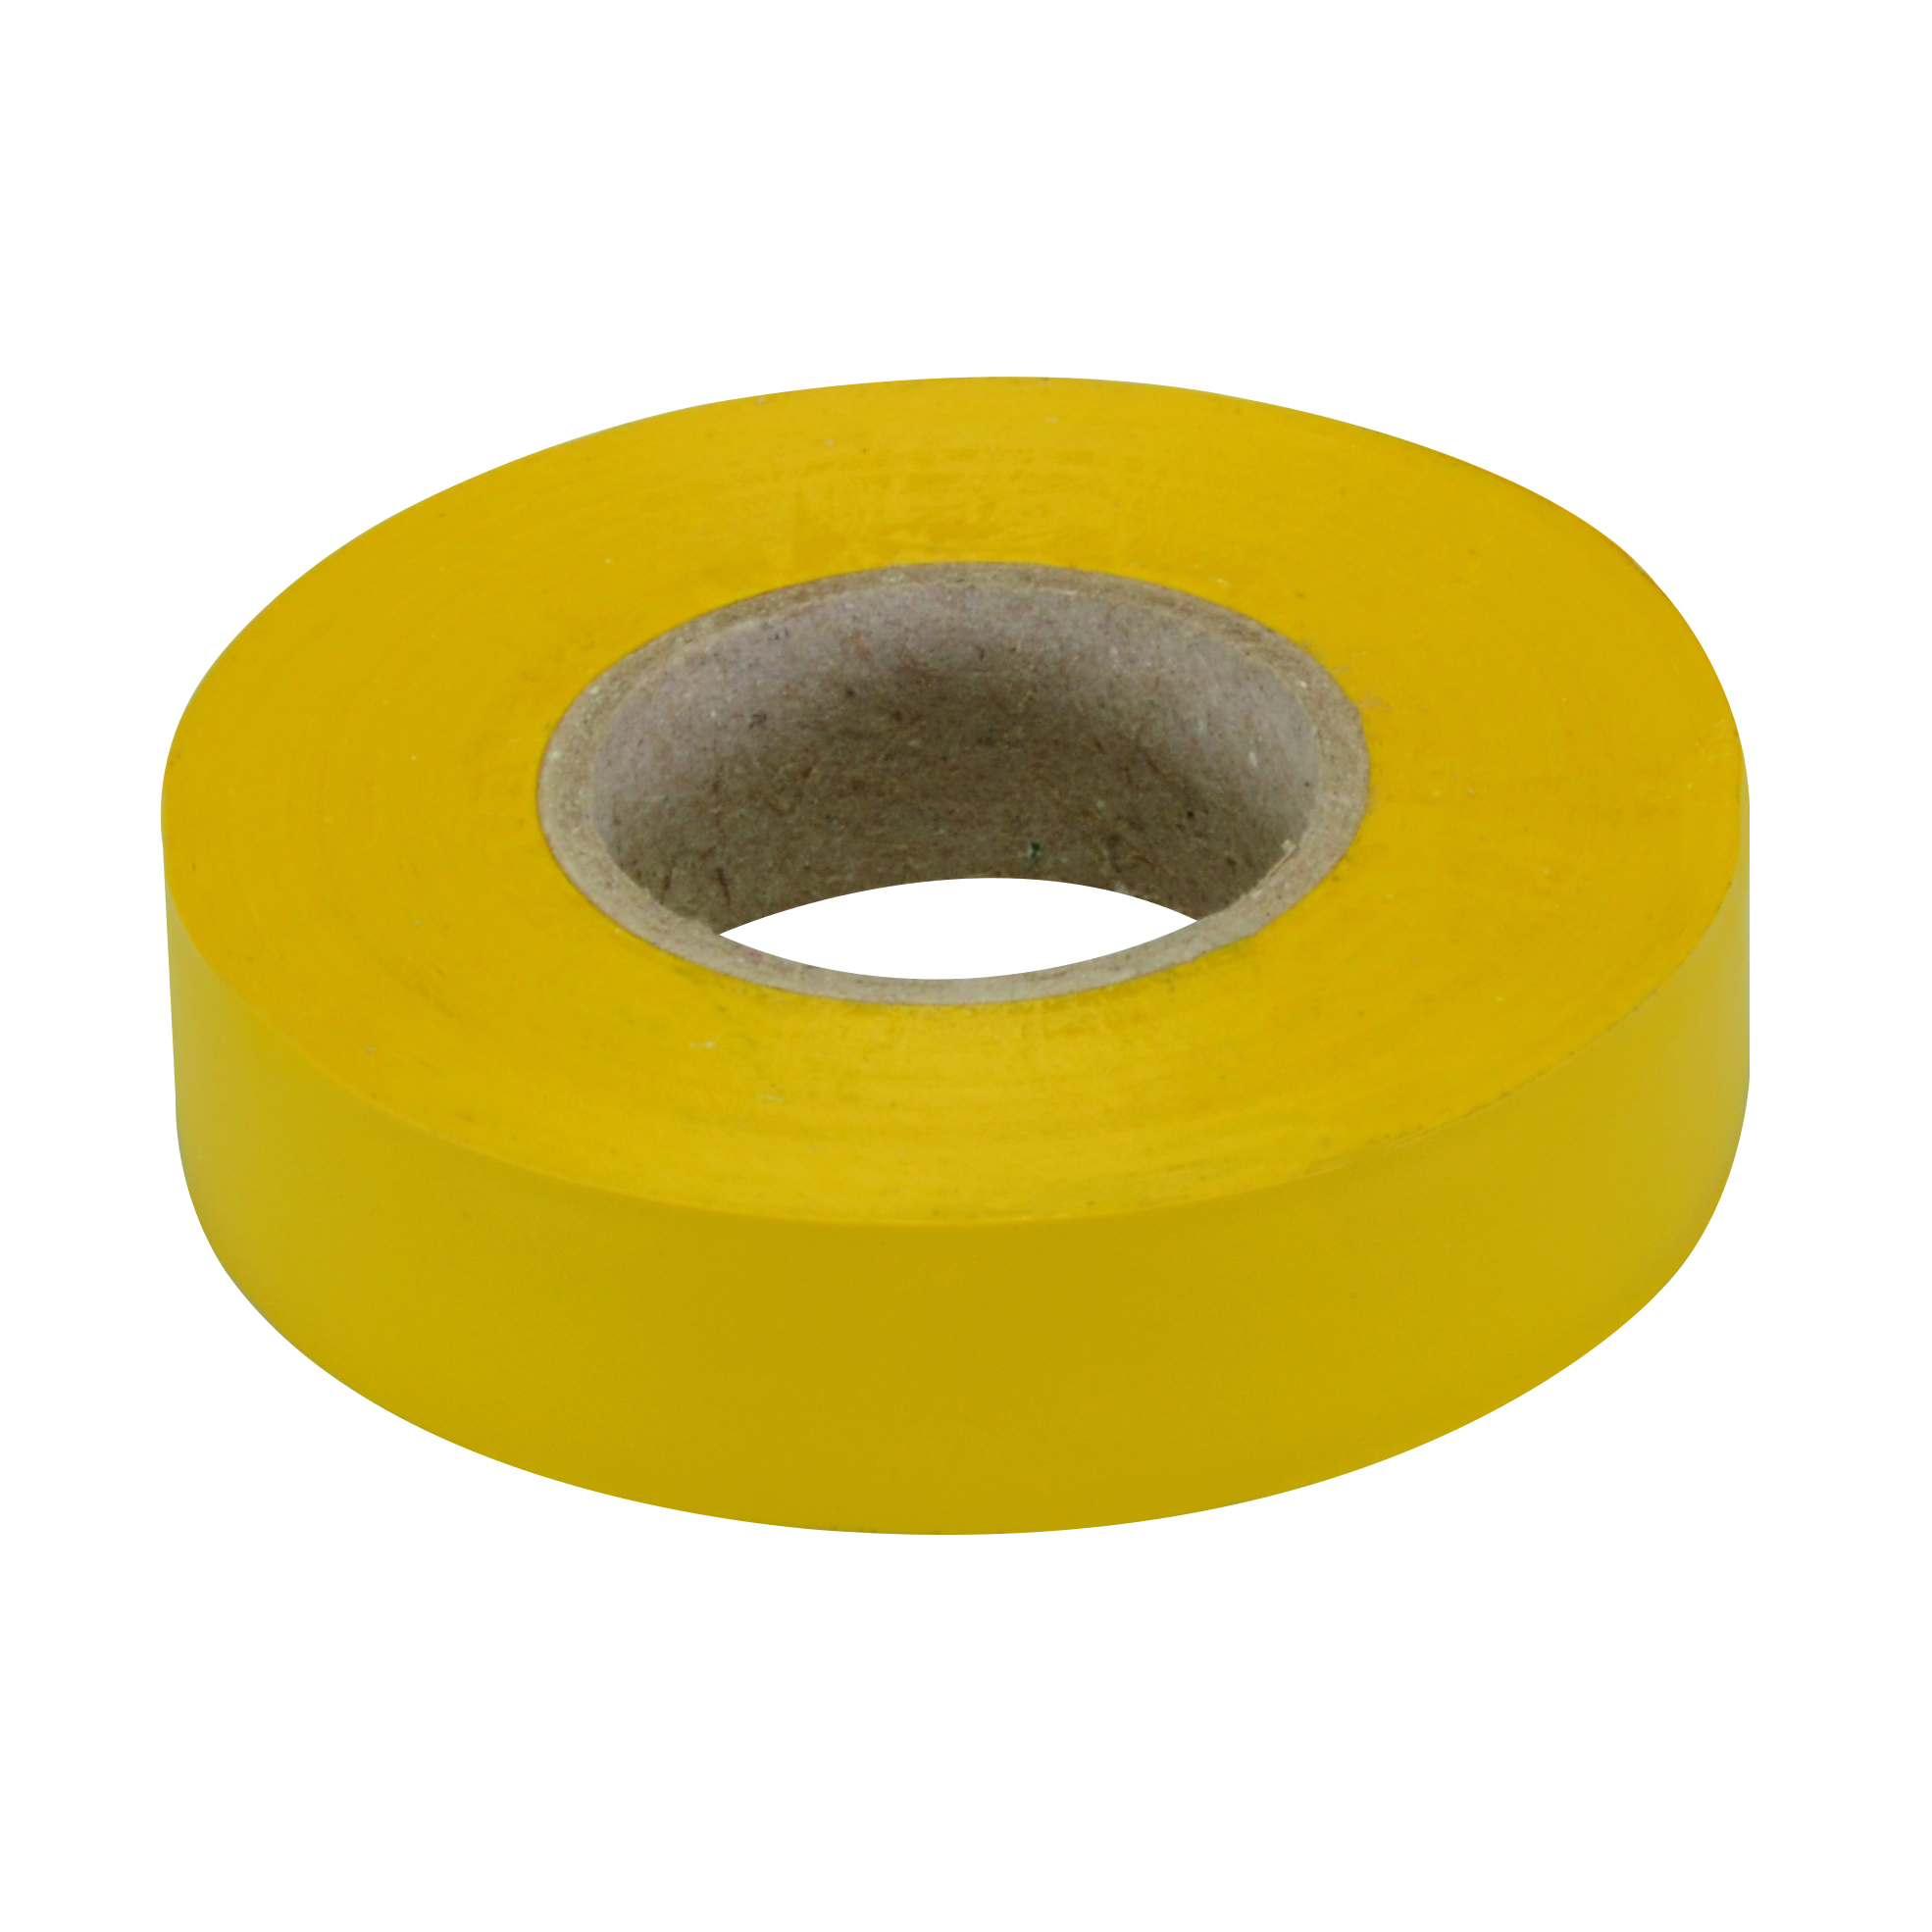 Fixman Electrical Insulation Tape - Yellow | Cottage Craft